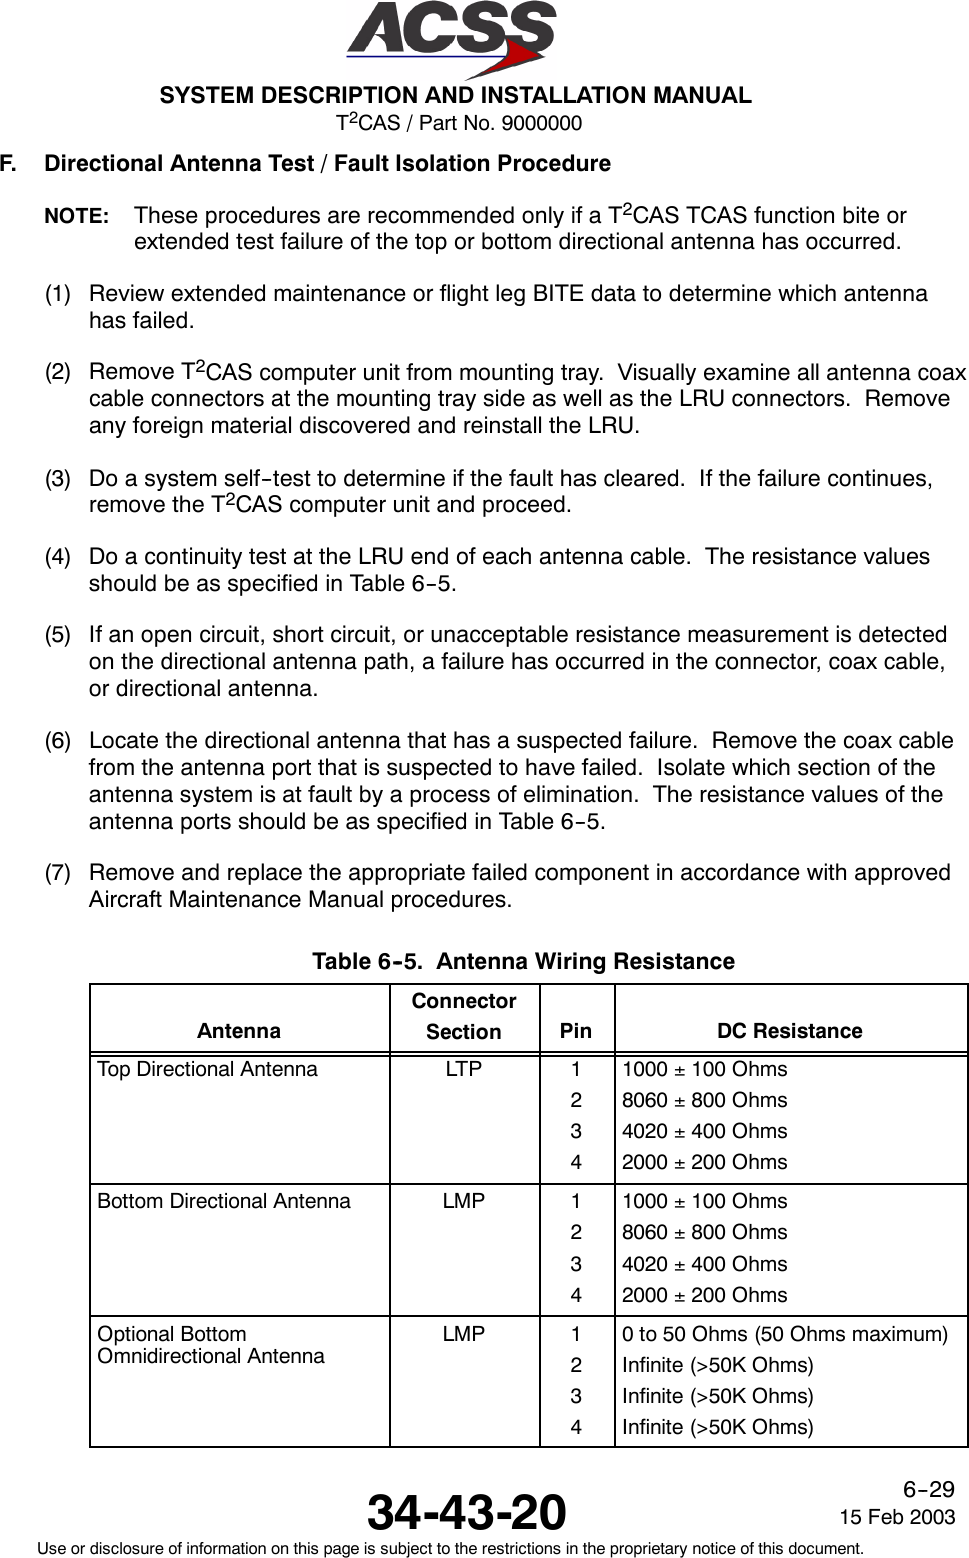 T2CAS / Part No. 9000000SYSTEM DESCRIPTION AND INSTALLATION MANUAL34-43-20 15 Feb 2003Use or disclosure of information on this page is subject to the restrictions in the proprietary notice of this document.6--29F. Directional Antenna Test / Fault Isolation ProcedureNOTE: These procedures are recommended only if a T2CAS TCAS function bite orextended test failure of the top or bottom directional antenna has occurred.(1) Review extended maintenance or flight leg BITE data to determine which antennahas failed.(2) Remove T2CAS computer unit from mounting tray. Visually examine all antenna coaxcable connectors at the mounting tray side as well as the LRU connectors. Removeany foreign material discovered and reinstall the LRU.(3) Do a system self--test to determine if the fault has cleared. If the failure continues,remove the T2CAS computer unit and proceed.(4) Do a continuity test at the LRU end of each antenna cable. The resistance valuesshould be as specified in Table 6--5.(5) If an open circuit, short circuit, or unacceptable resistance measurement is detectedon the directional antenna path, a failure has occurred in the connector, coax cable,or directional antenna.(6) Locate the directional antenna that has a suspected failure. Remove the coax cablefrom the antenna port that is suspected to have failed. Isolate which section of theantenna system is at fault by a process of elimination. The resistance values of theantenna ports should be as specified in Table 6--5.(7) Remove and replace the appropriate failed component in accordance with approvedAircraft Maintenance Manual procedures.Table 6--5. Antenna Wiring ResistanceAntennaConnectorSection Pin DC ResistanceTop Directional Antenna LTP 12341000 ±100 Ohms8060 ±800 Ohms4020 ±400 Ohms2000 ±200 OhmsBottom Directional Antenna LMP 12341000 ±100 Ohms8060 ±800 Ohms4020 ±400 Ohms2000 ±200 OhmsOptional BottomOmnidirectional AntennaLMP 12340 to 50 Ohms (50 Ohms maximum)Infinite (&gt;50K Ohms)Infinite (&gt;50K Ohms)Infinite (&gt;50K Ohms)